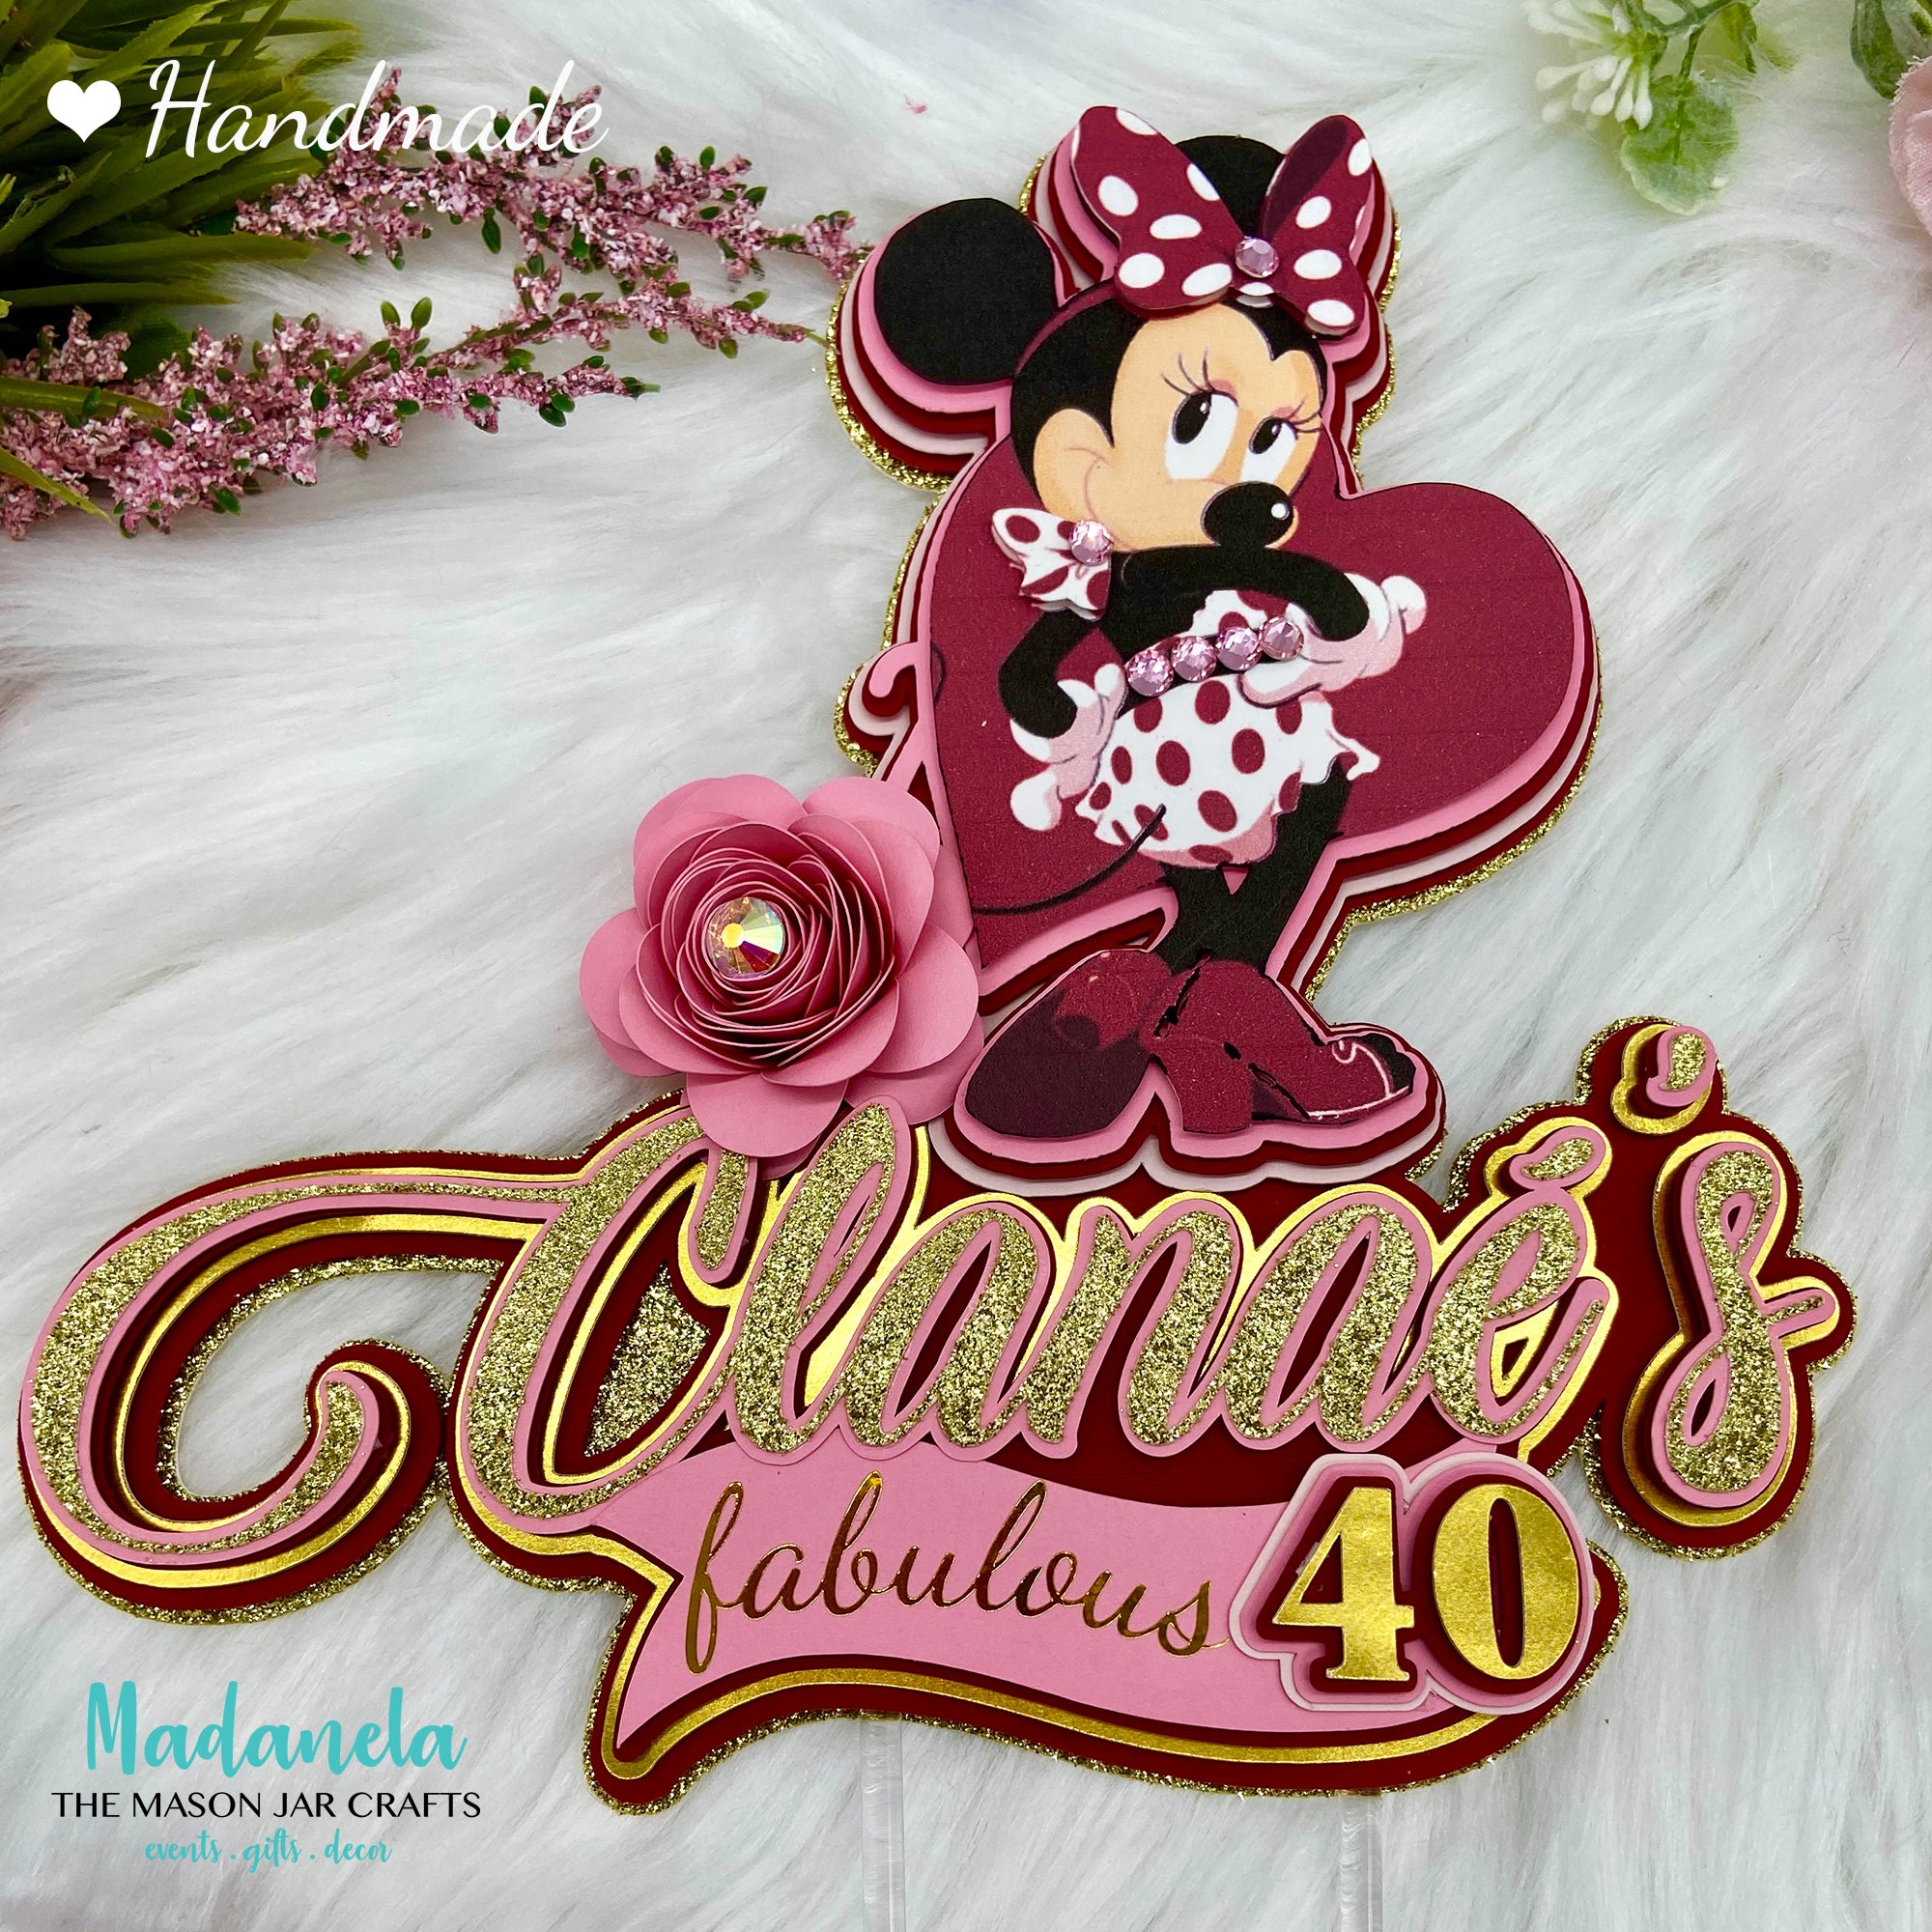 Cake decorating tutorials | how to make a DISNEY MINNIE MOUSE Cake |  Sugarella Sweets - YouTube